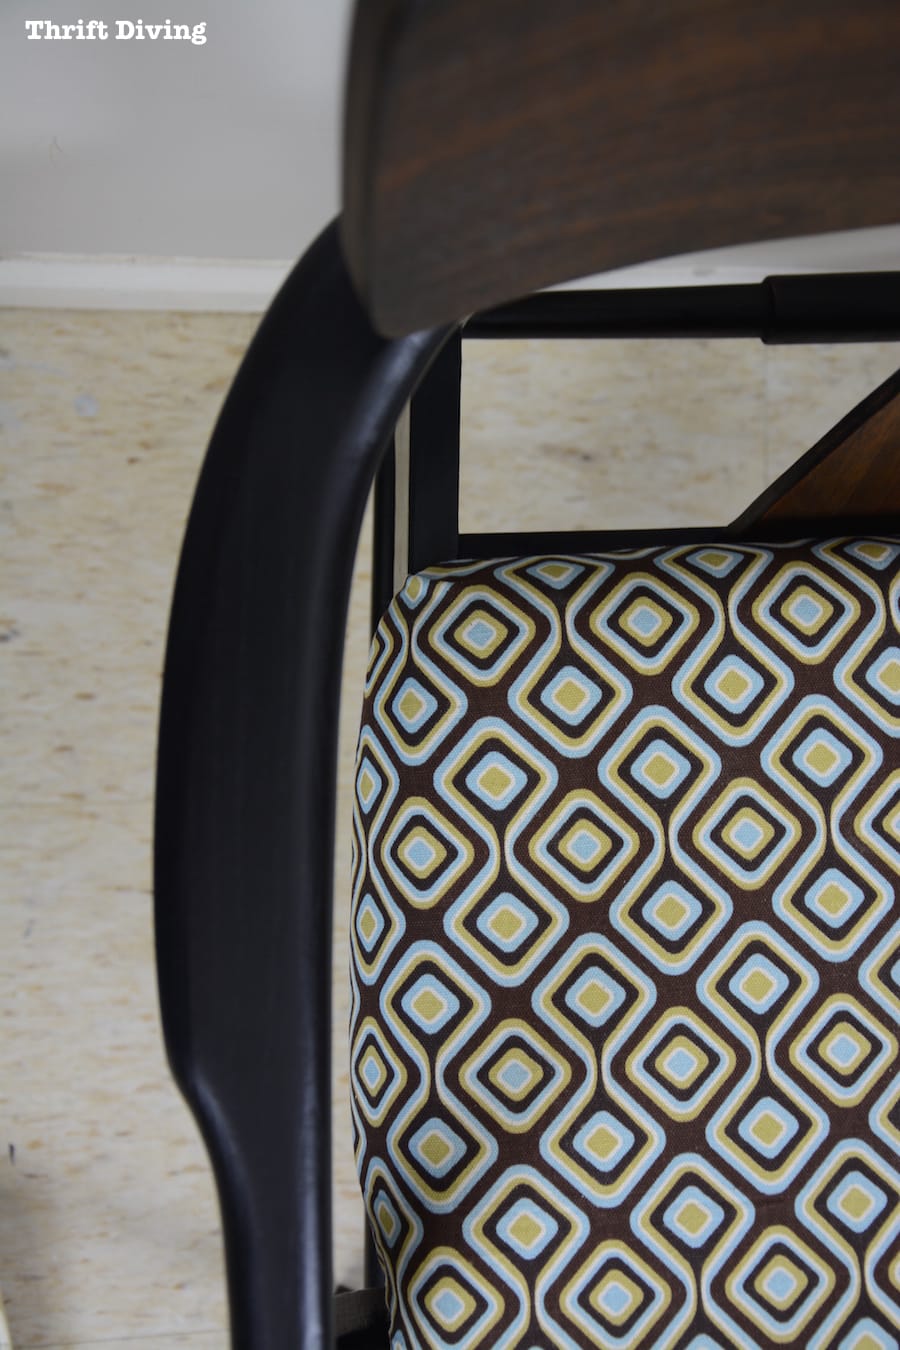 Mid-century modern chair makeover - Chose fabric that complimented the geometrical shape of the chair - ThriftDiving.com